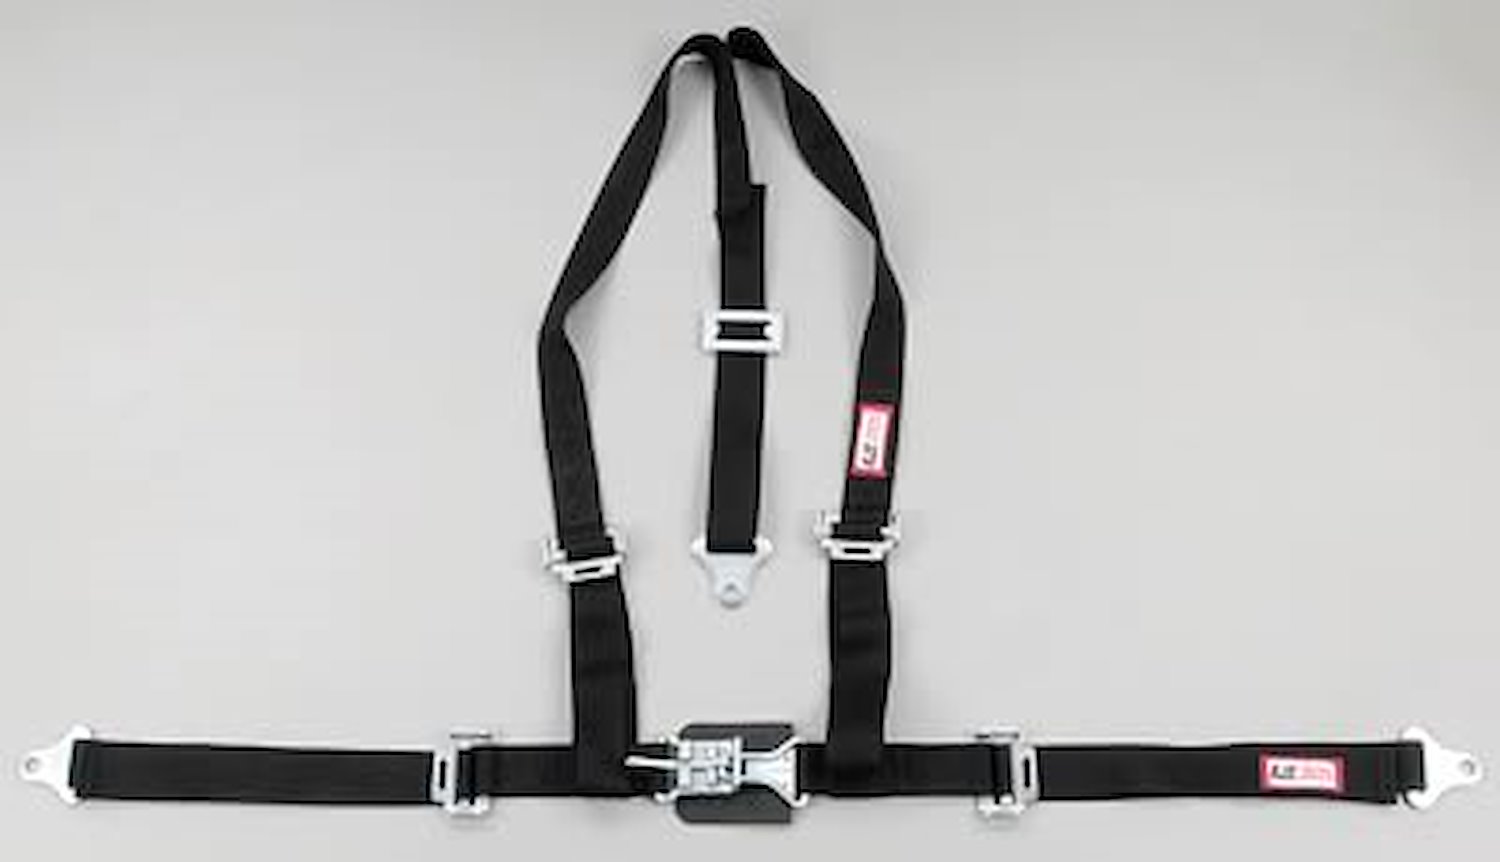 NON-SFI L&L HARNESS 2 PULL DOWN Lap Belt SNAP SEWN IN 2 S.H. Y FLOOR Mount WRAP/SNAP RED